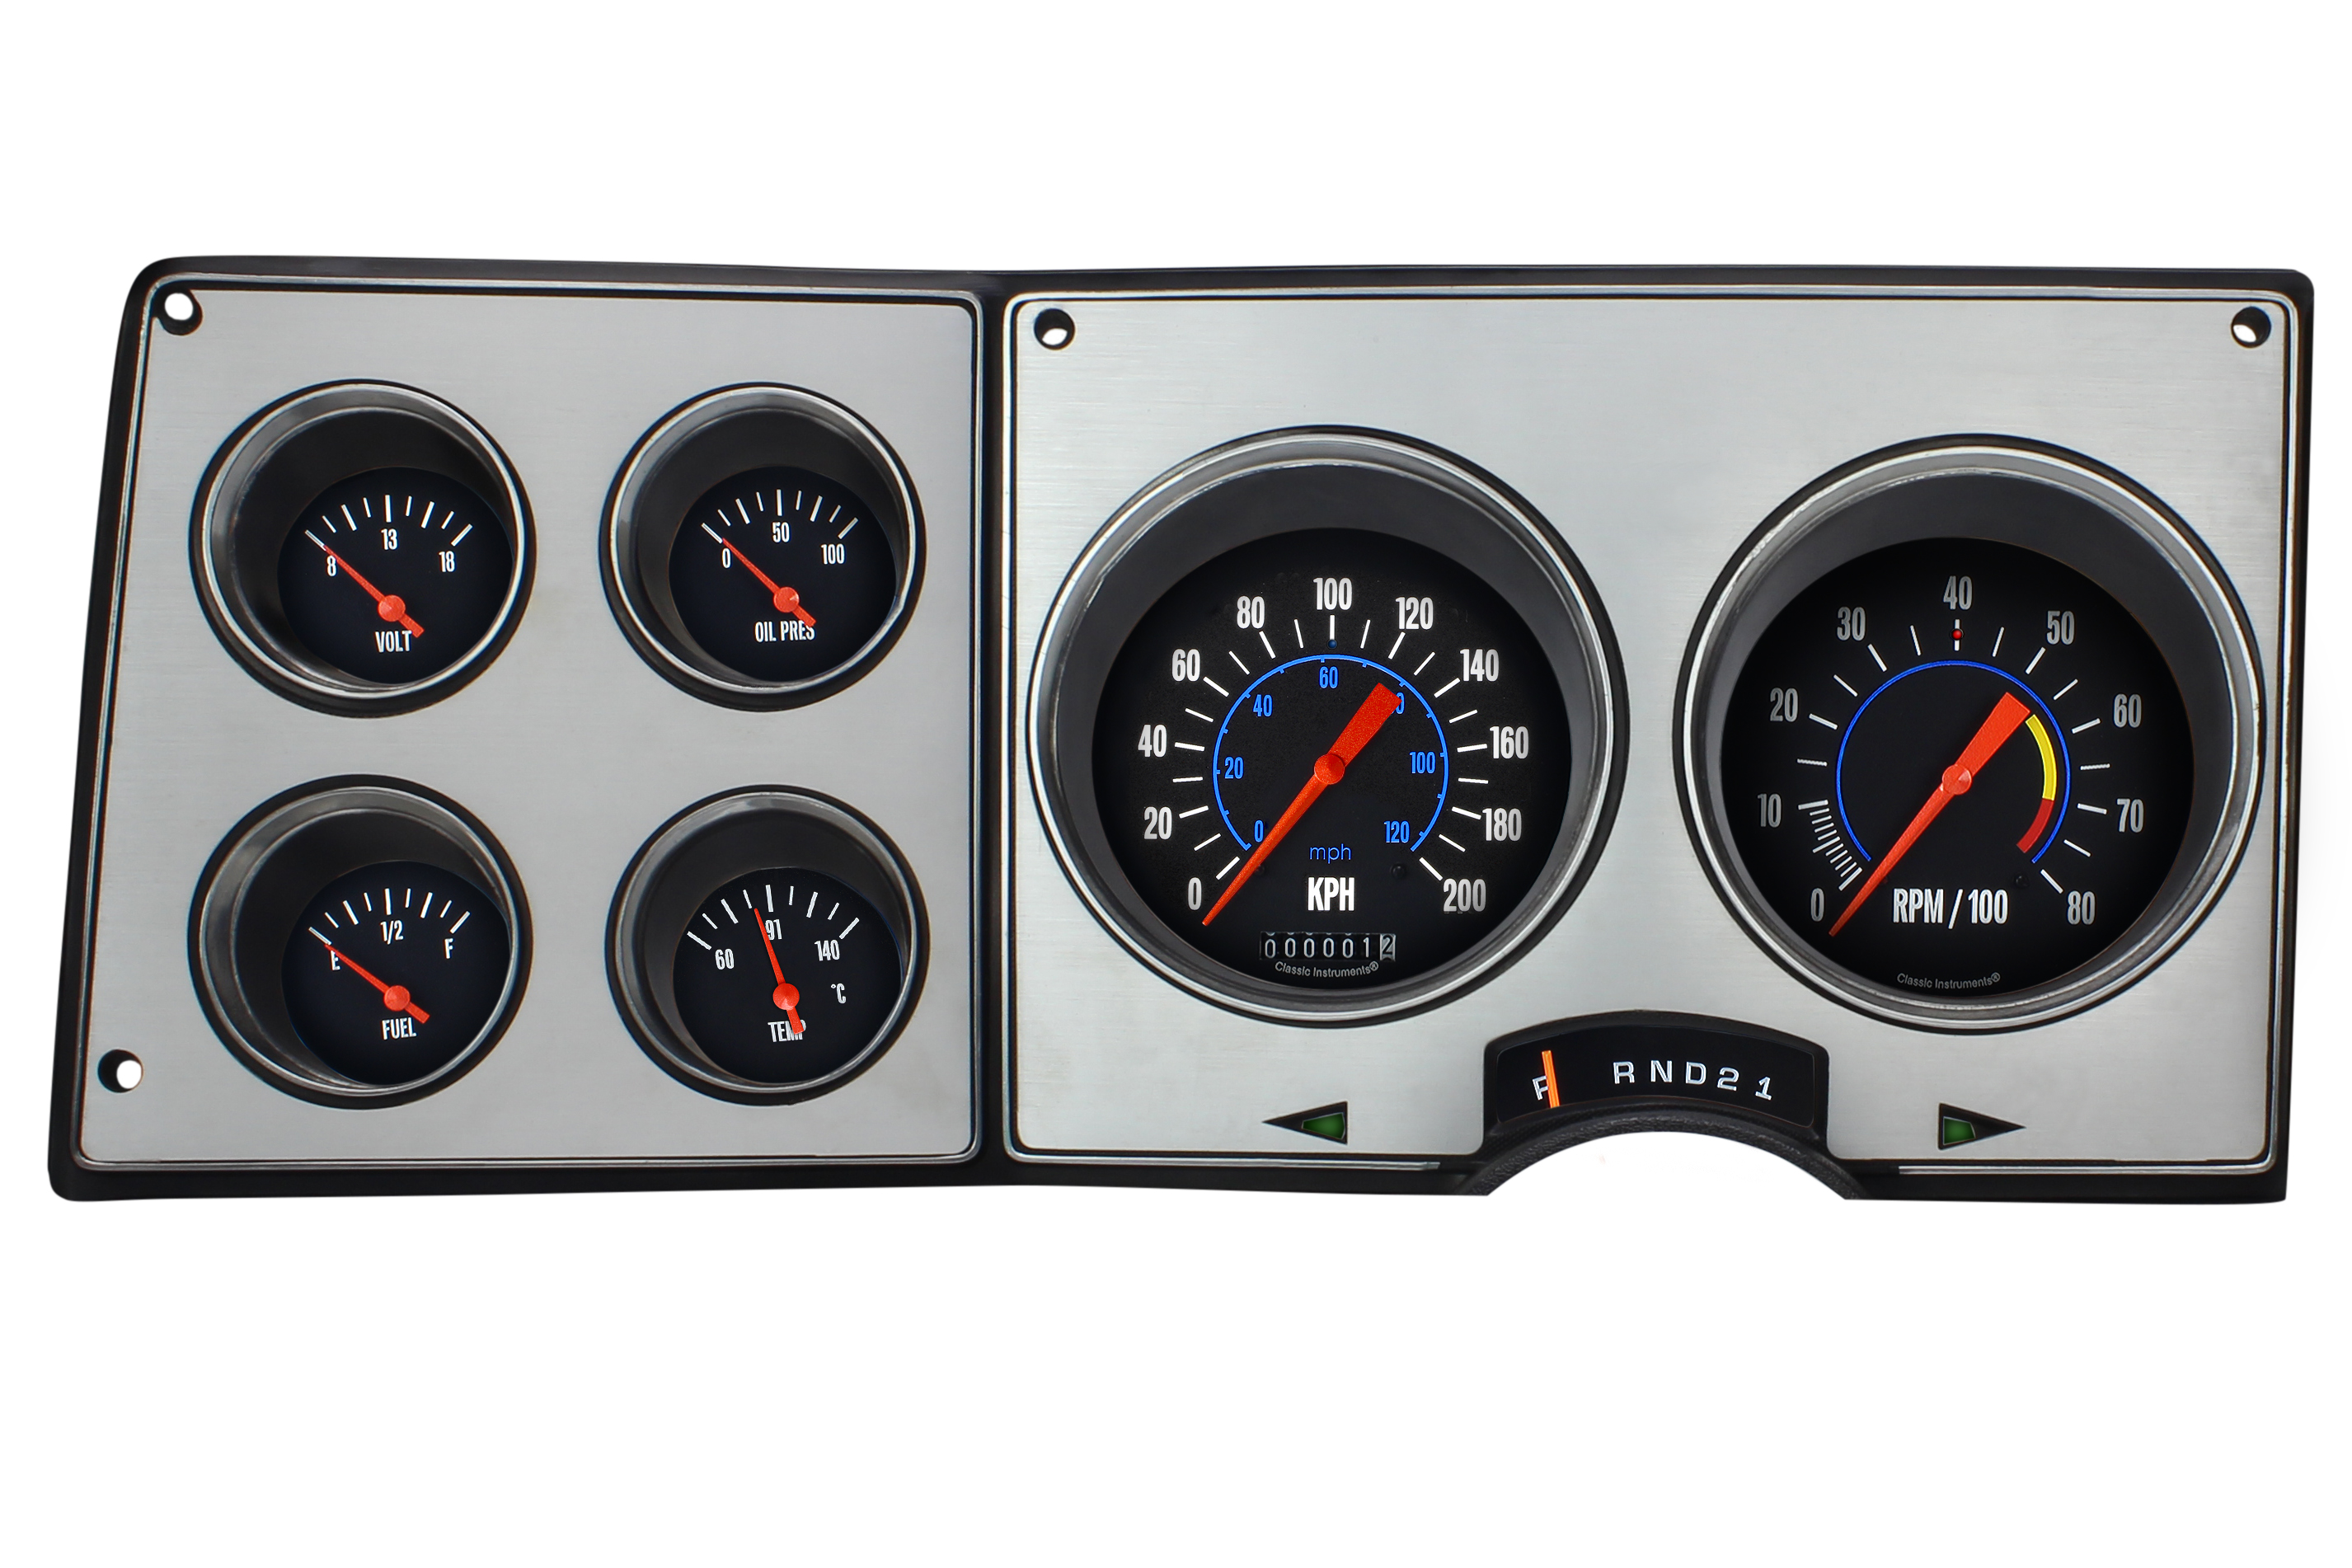 Metric Square Body Instrument Cluster CarBuff Network.